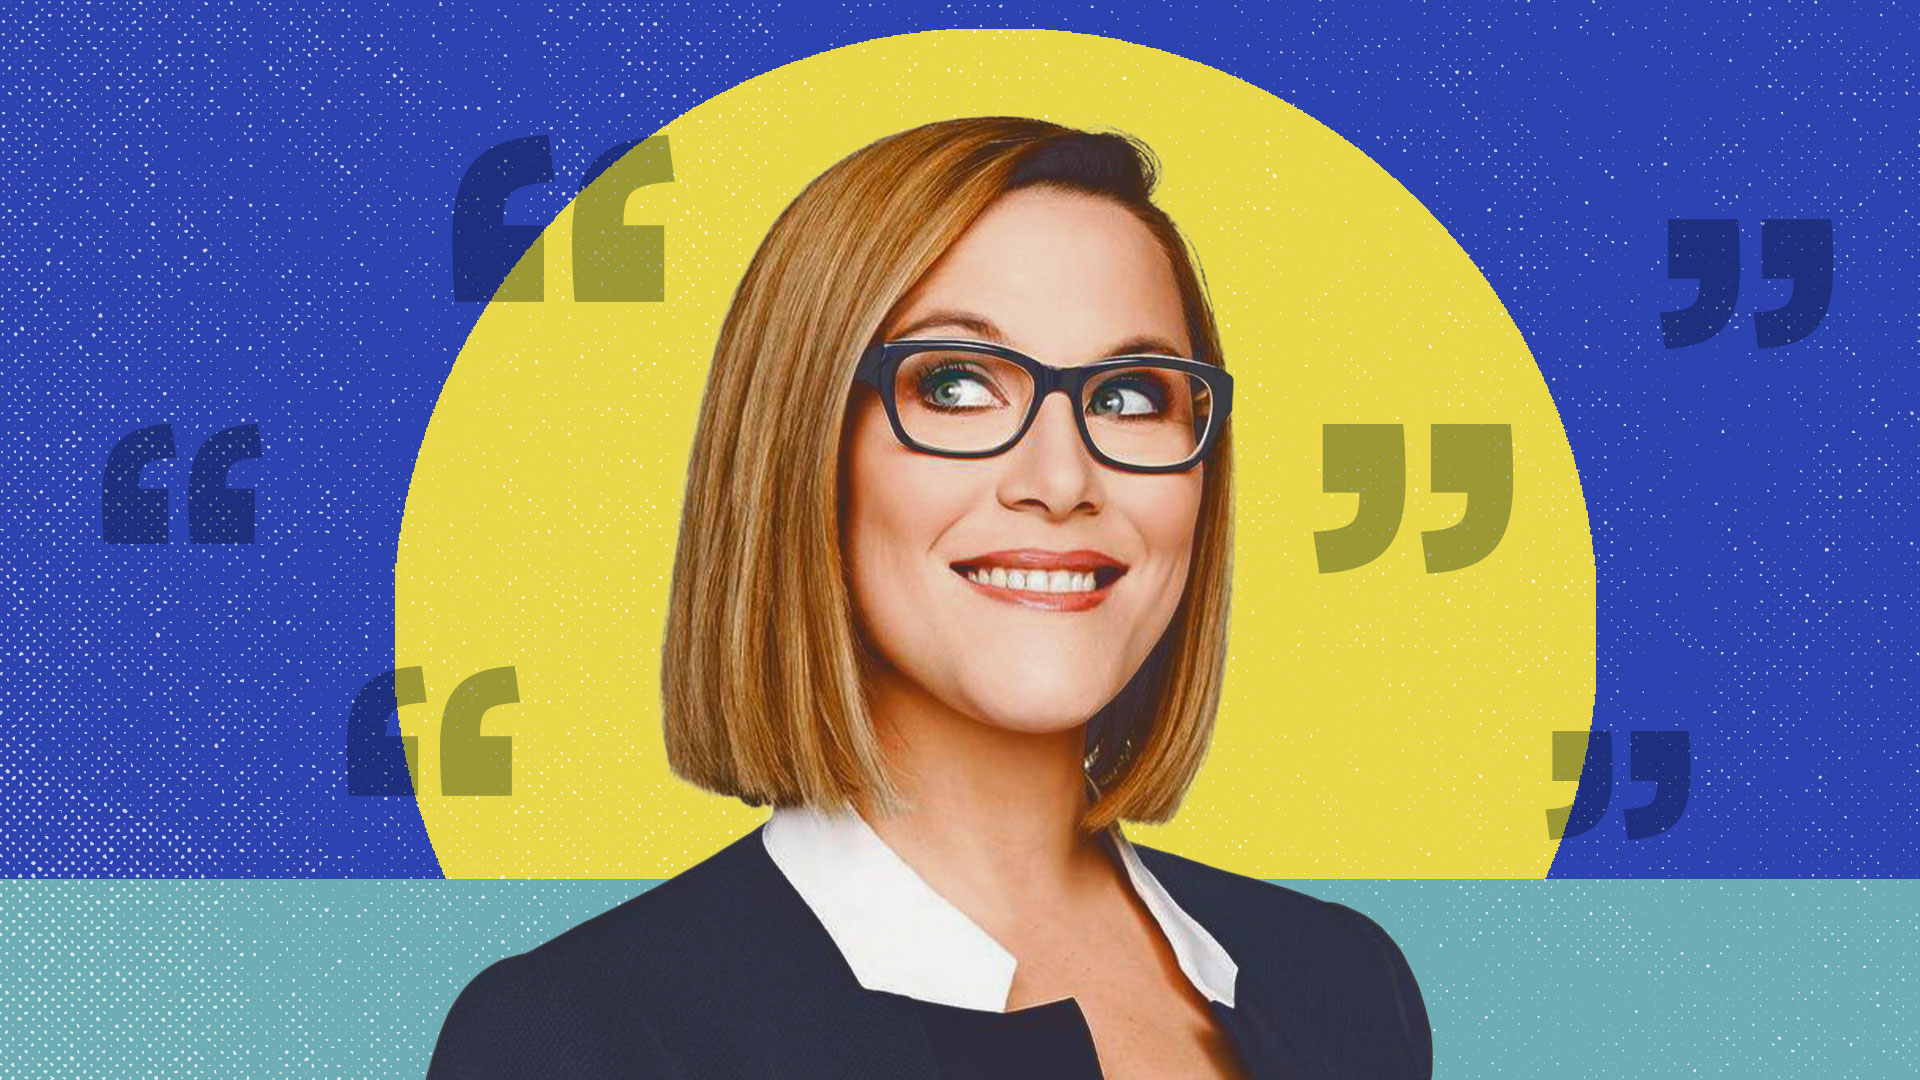 diana kwan recommends se cupp is hot pic